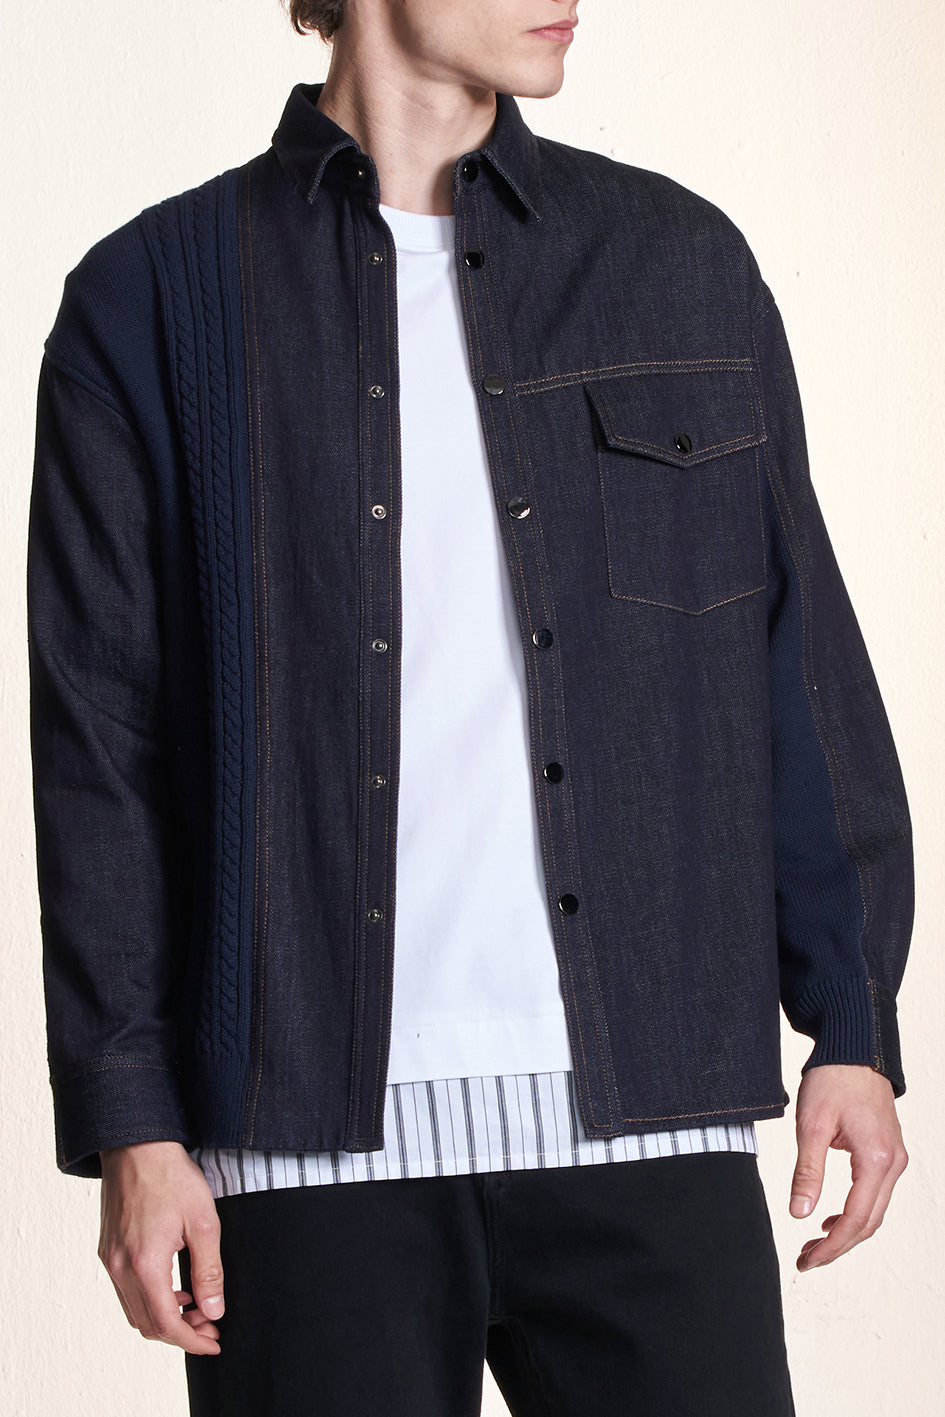 Denim Shirt Contrast With Knit